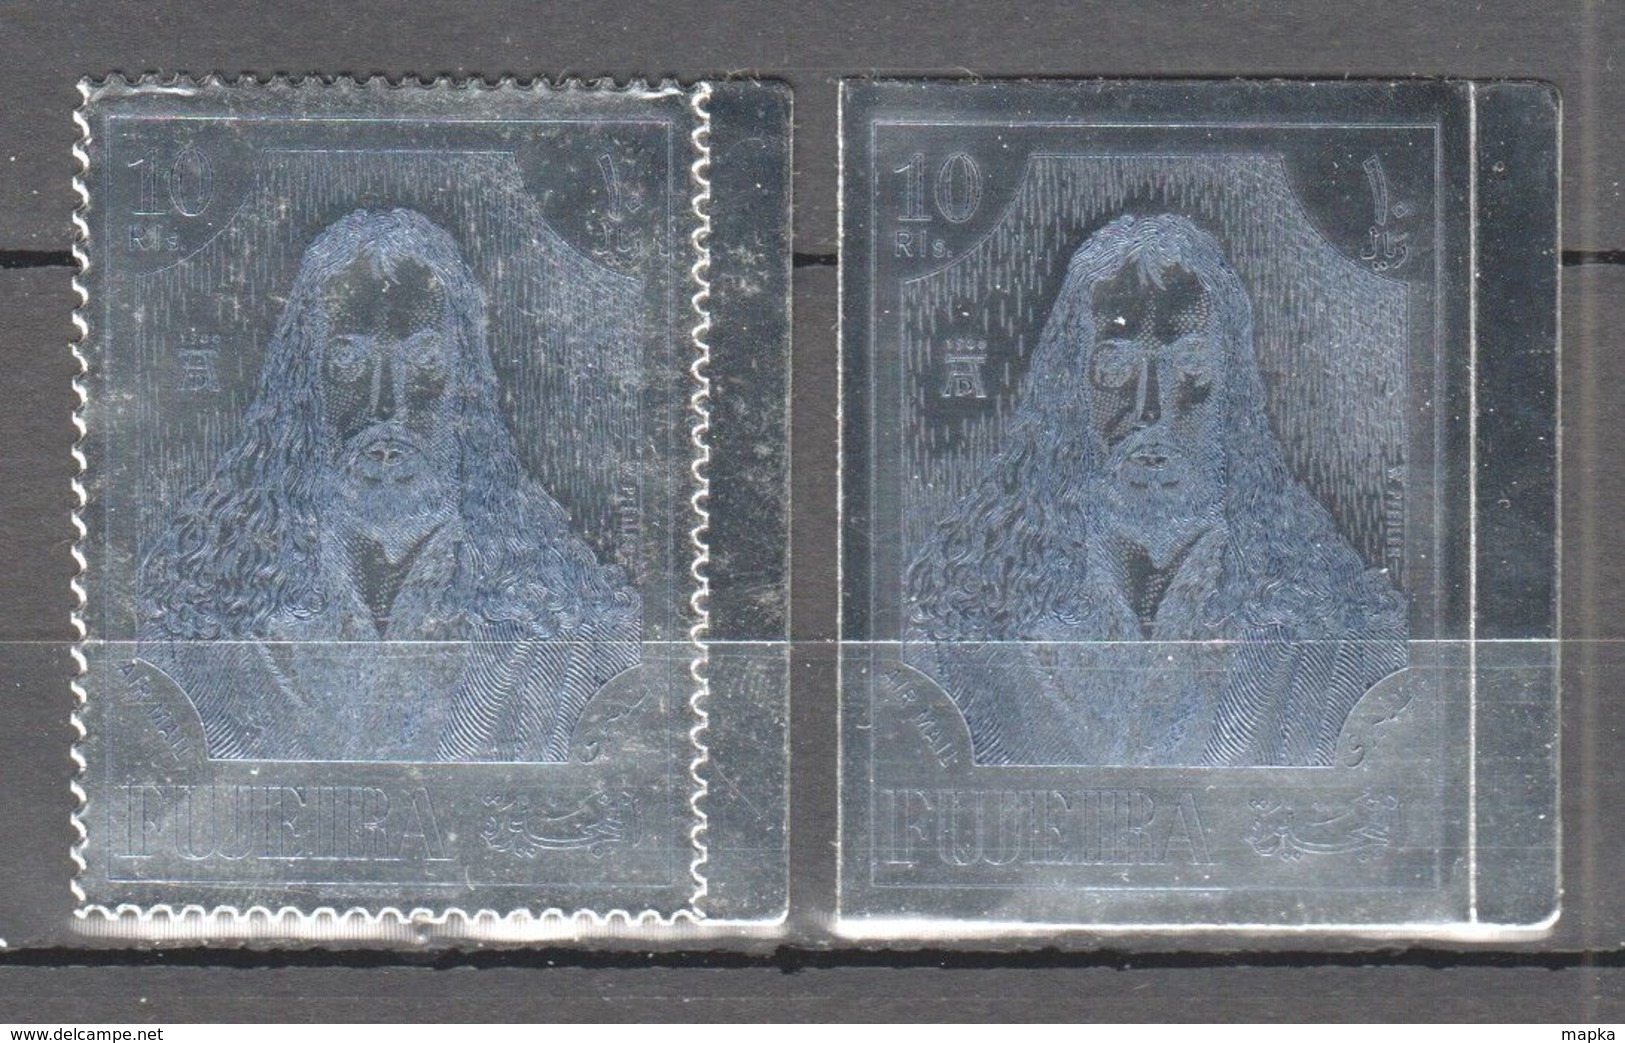 A721 IMPERF,PERF SILVER FUJEIRA ART PAINTINGS DURER AIR MAIL 2ST MNH - Christianity